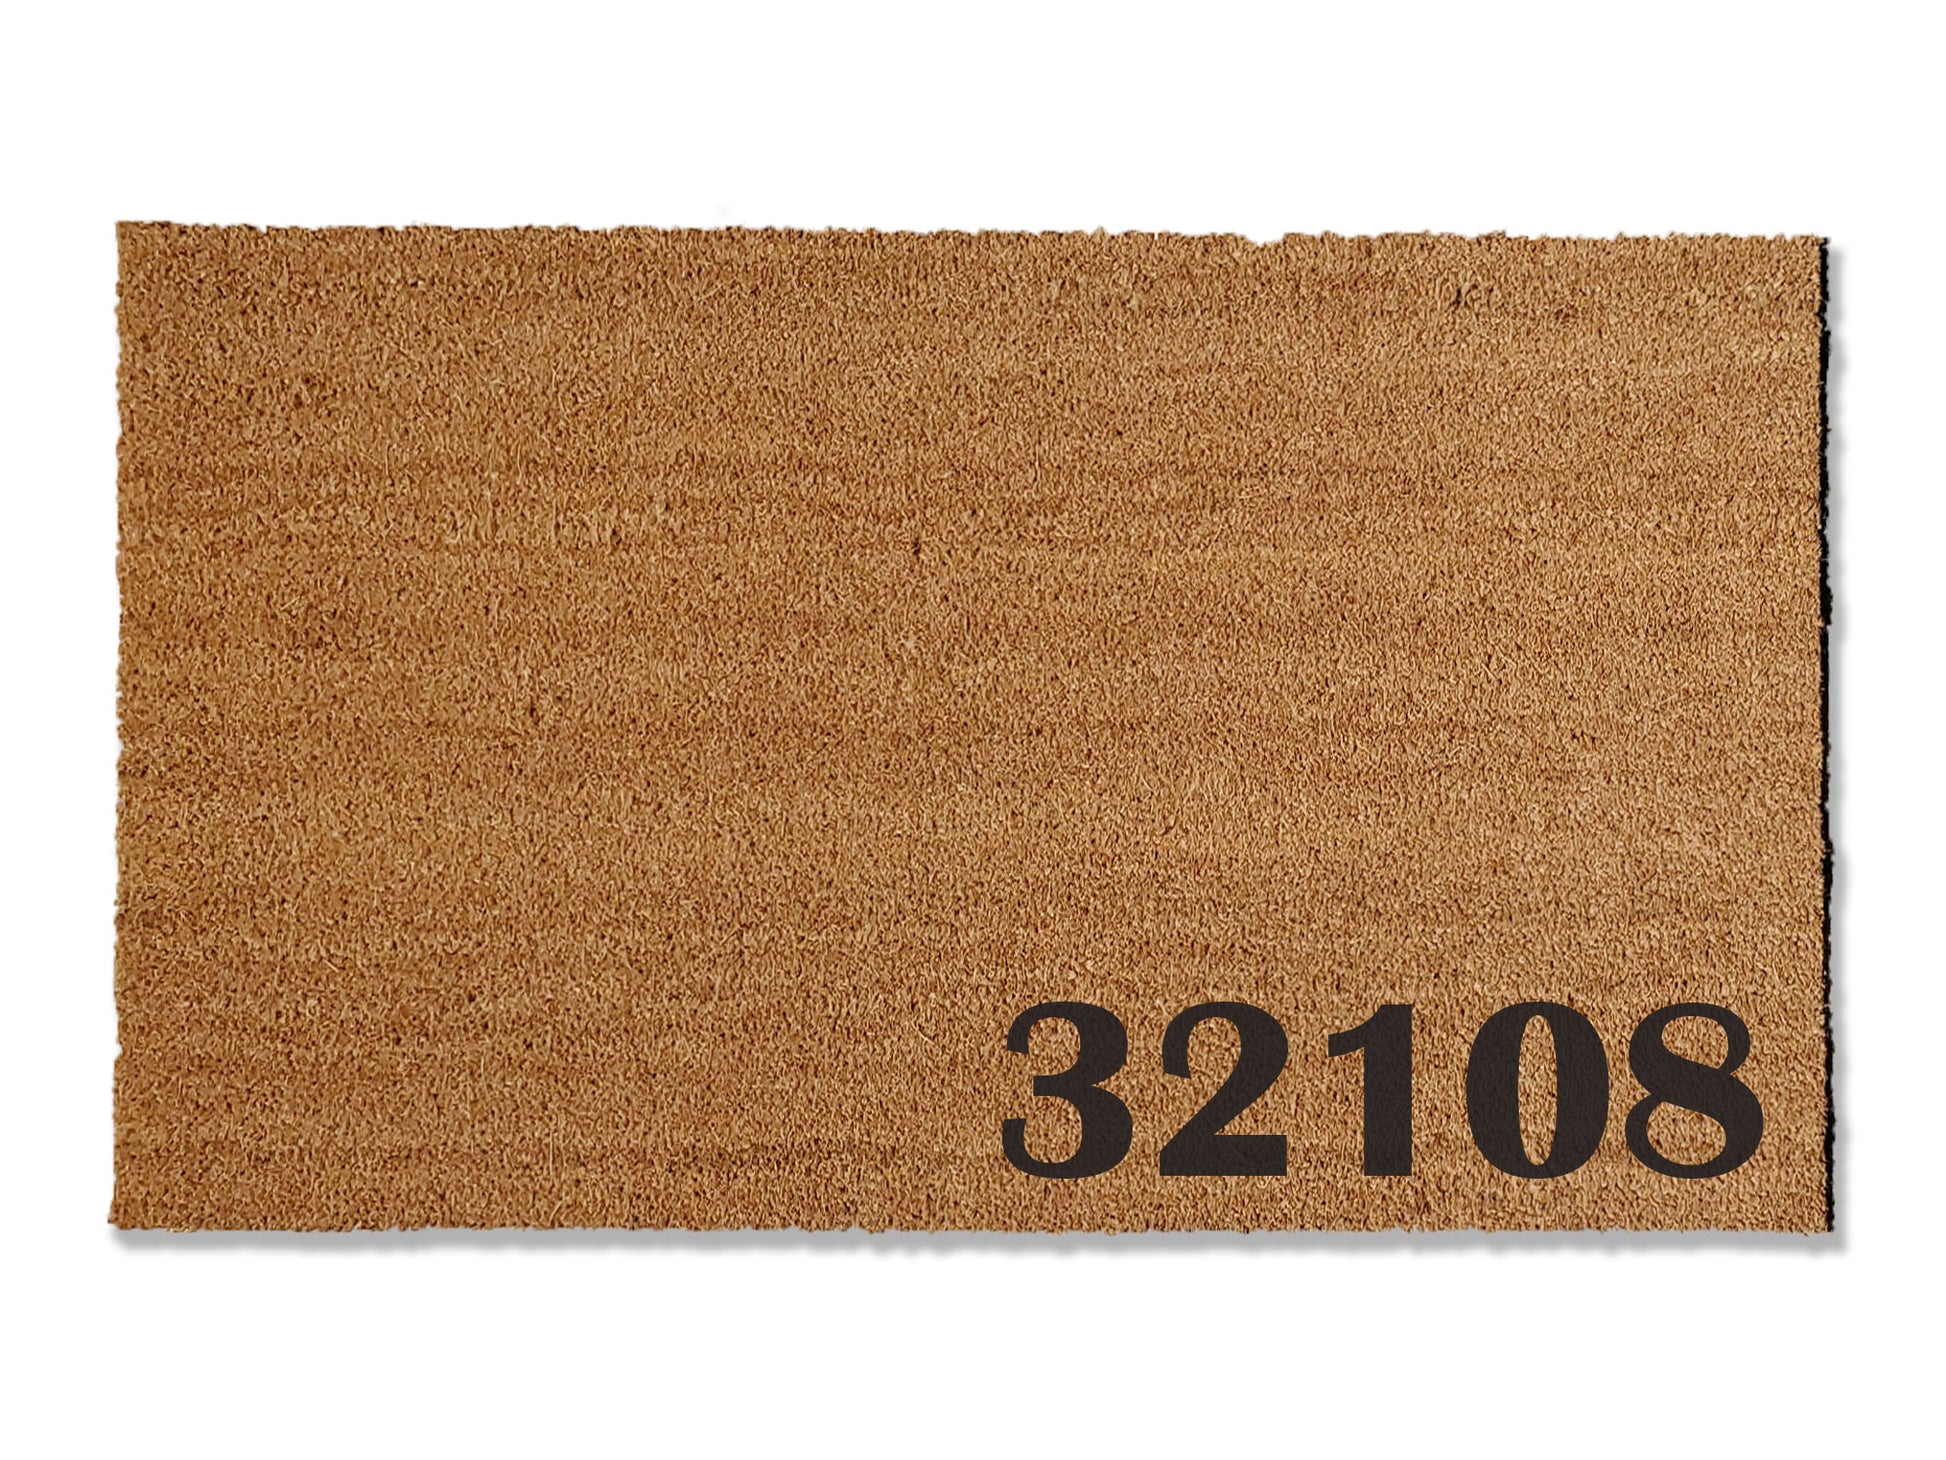 Elevate your entryway with our custom coir doormat, featuring personalized house numbers. Available in multiple sizes, this unique addition adds a touch of sophistication to your home's exterior. Make a statement and welcome guests with style by showcasing your house numbers on this versatile coir doormat.